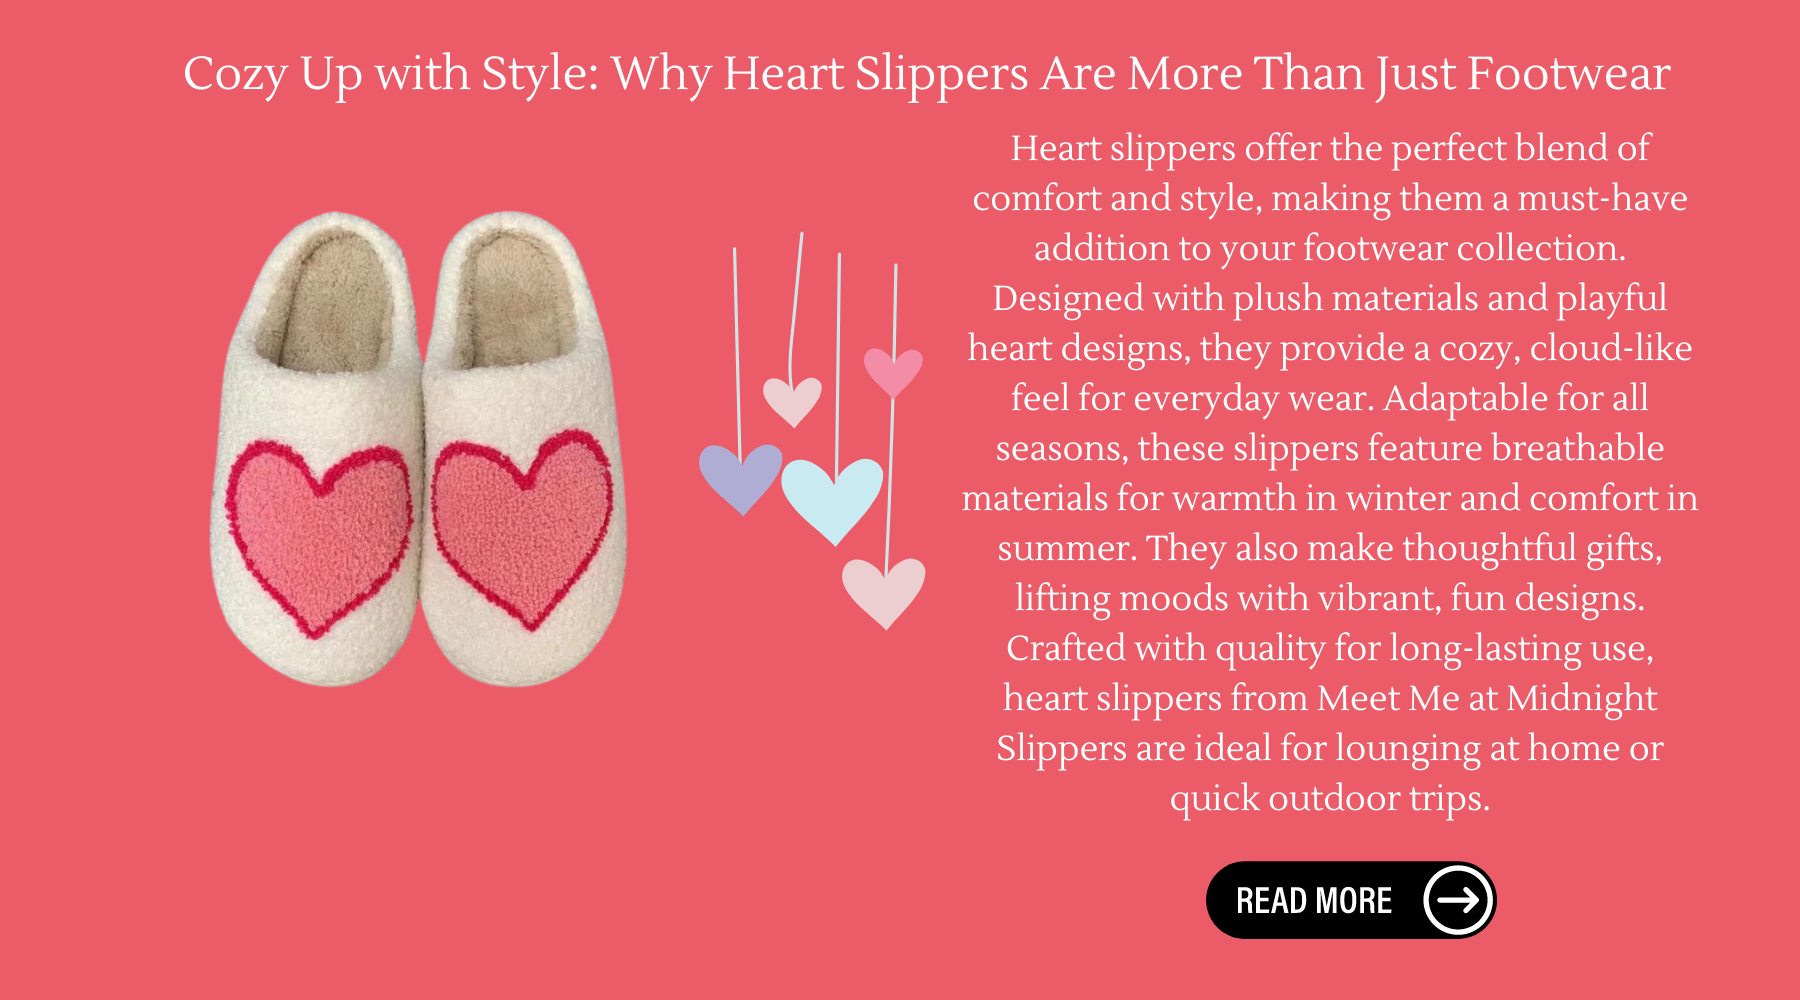 Cozy Up with Style: Why Heart Slippers Are More Than Just Footwear